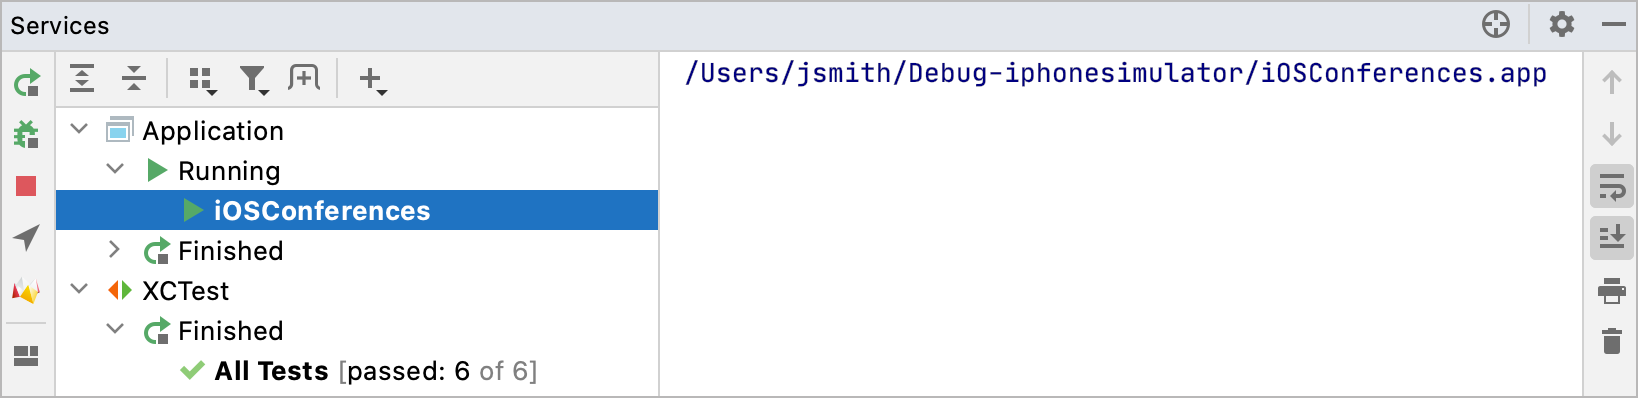 Run/Debug configurations in the Services tool window